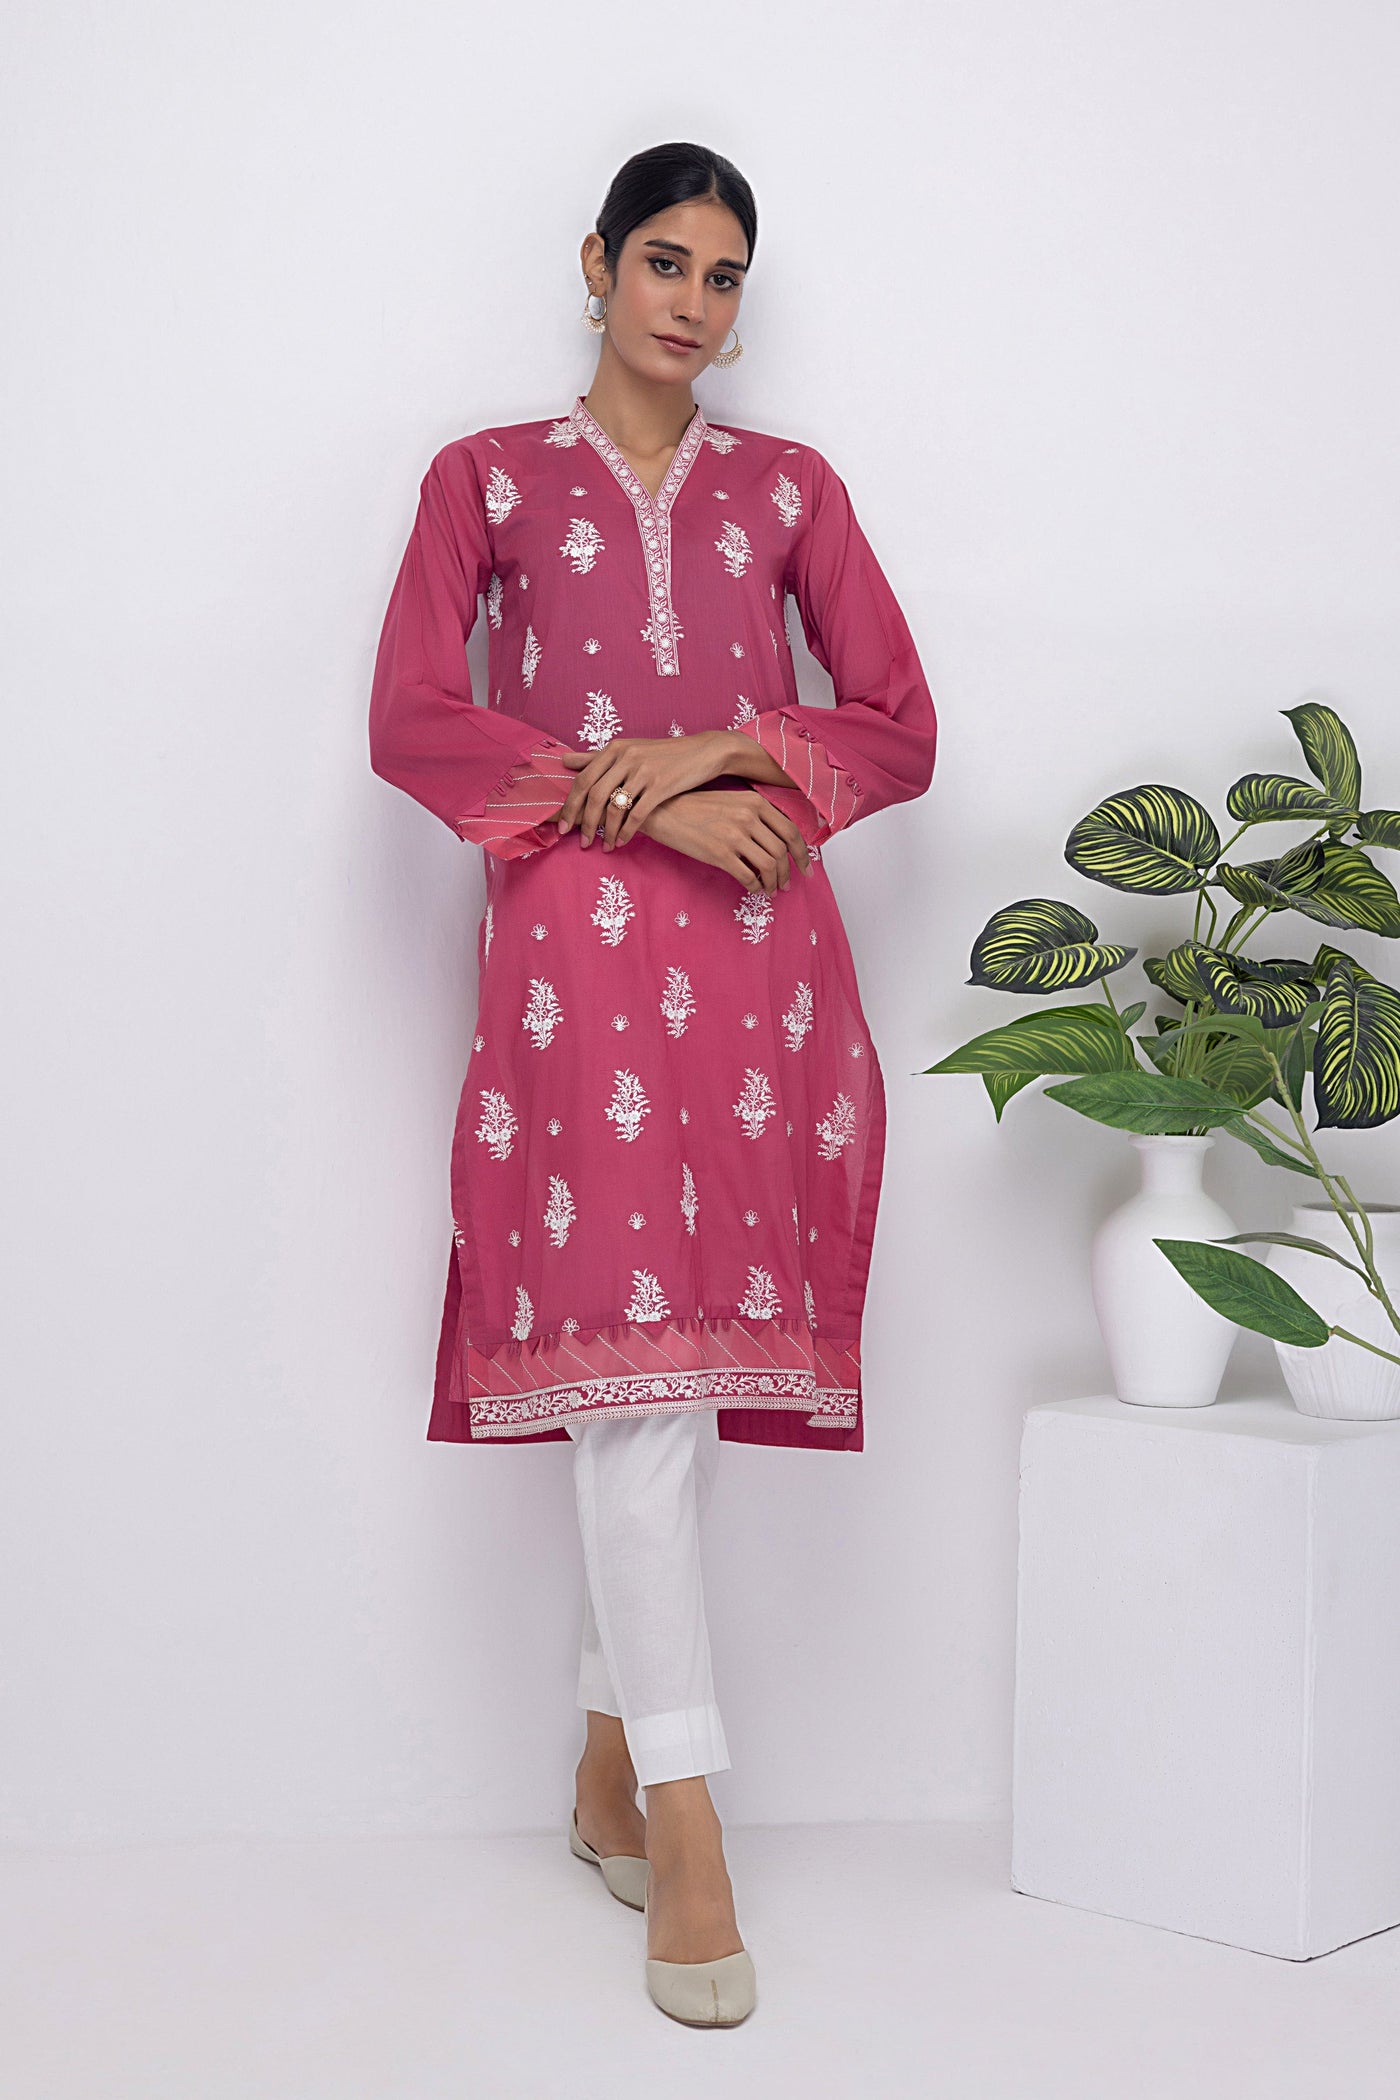 Lakhany 01 Piece Ready to Wear Dyed Embroidered Shirt - LSM-3227